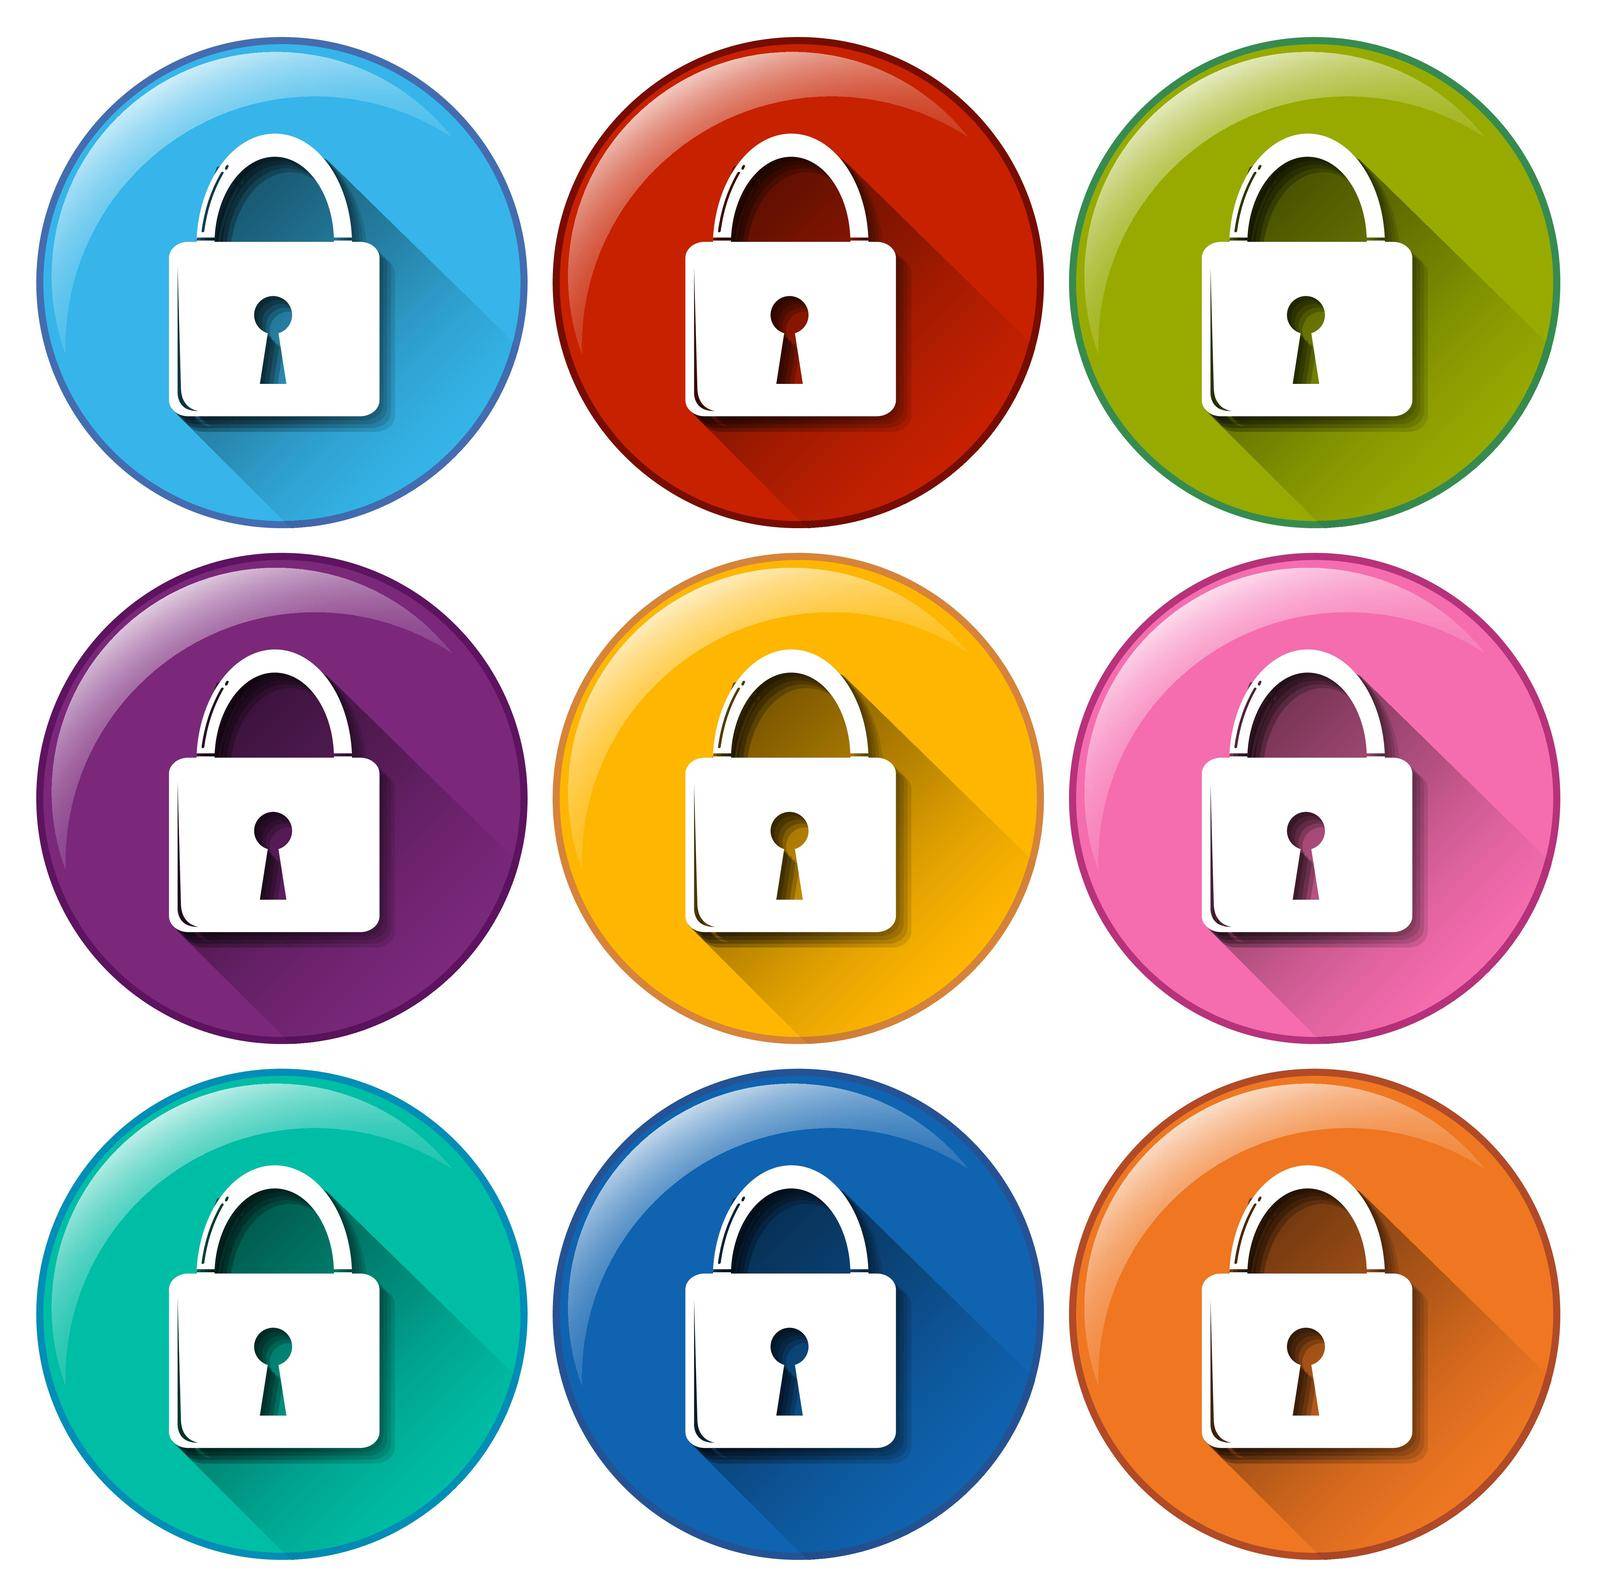 Illustration of the padlock buttons on a white background